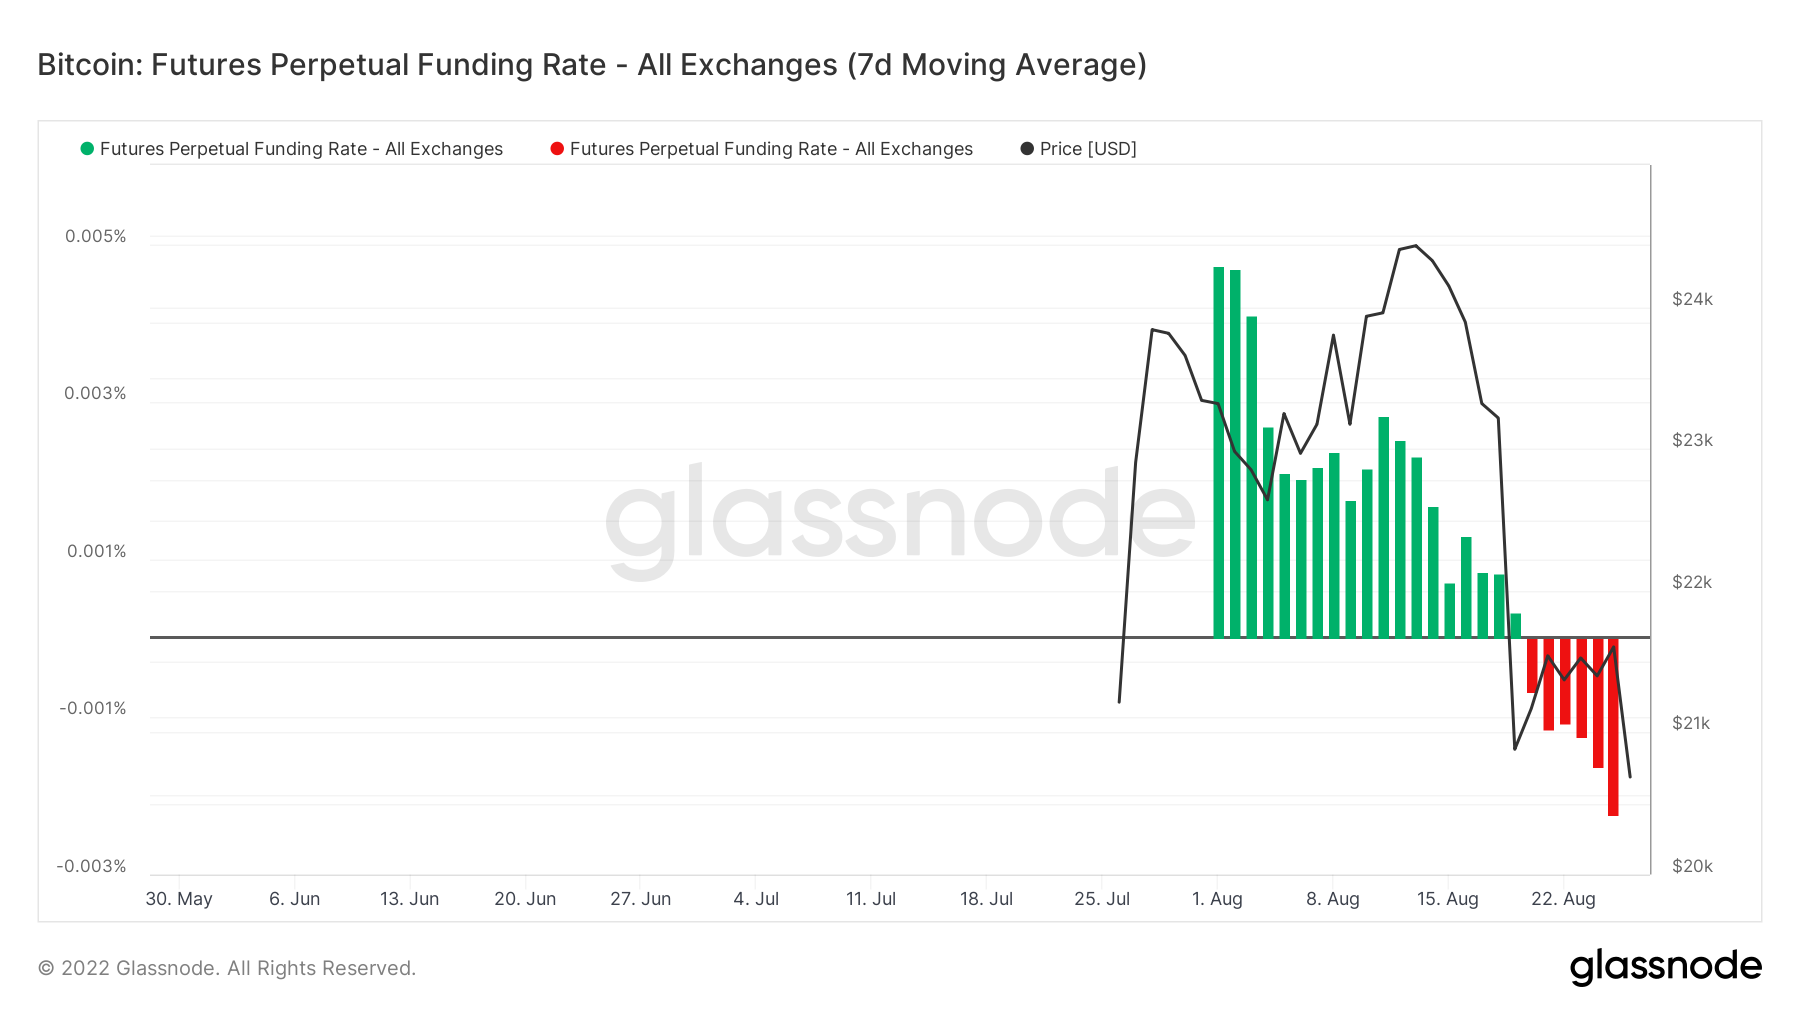 glassnode-studio_bitcoin-futures-perpetual-funding-rate-all-exchanges-7d-moving-average